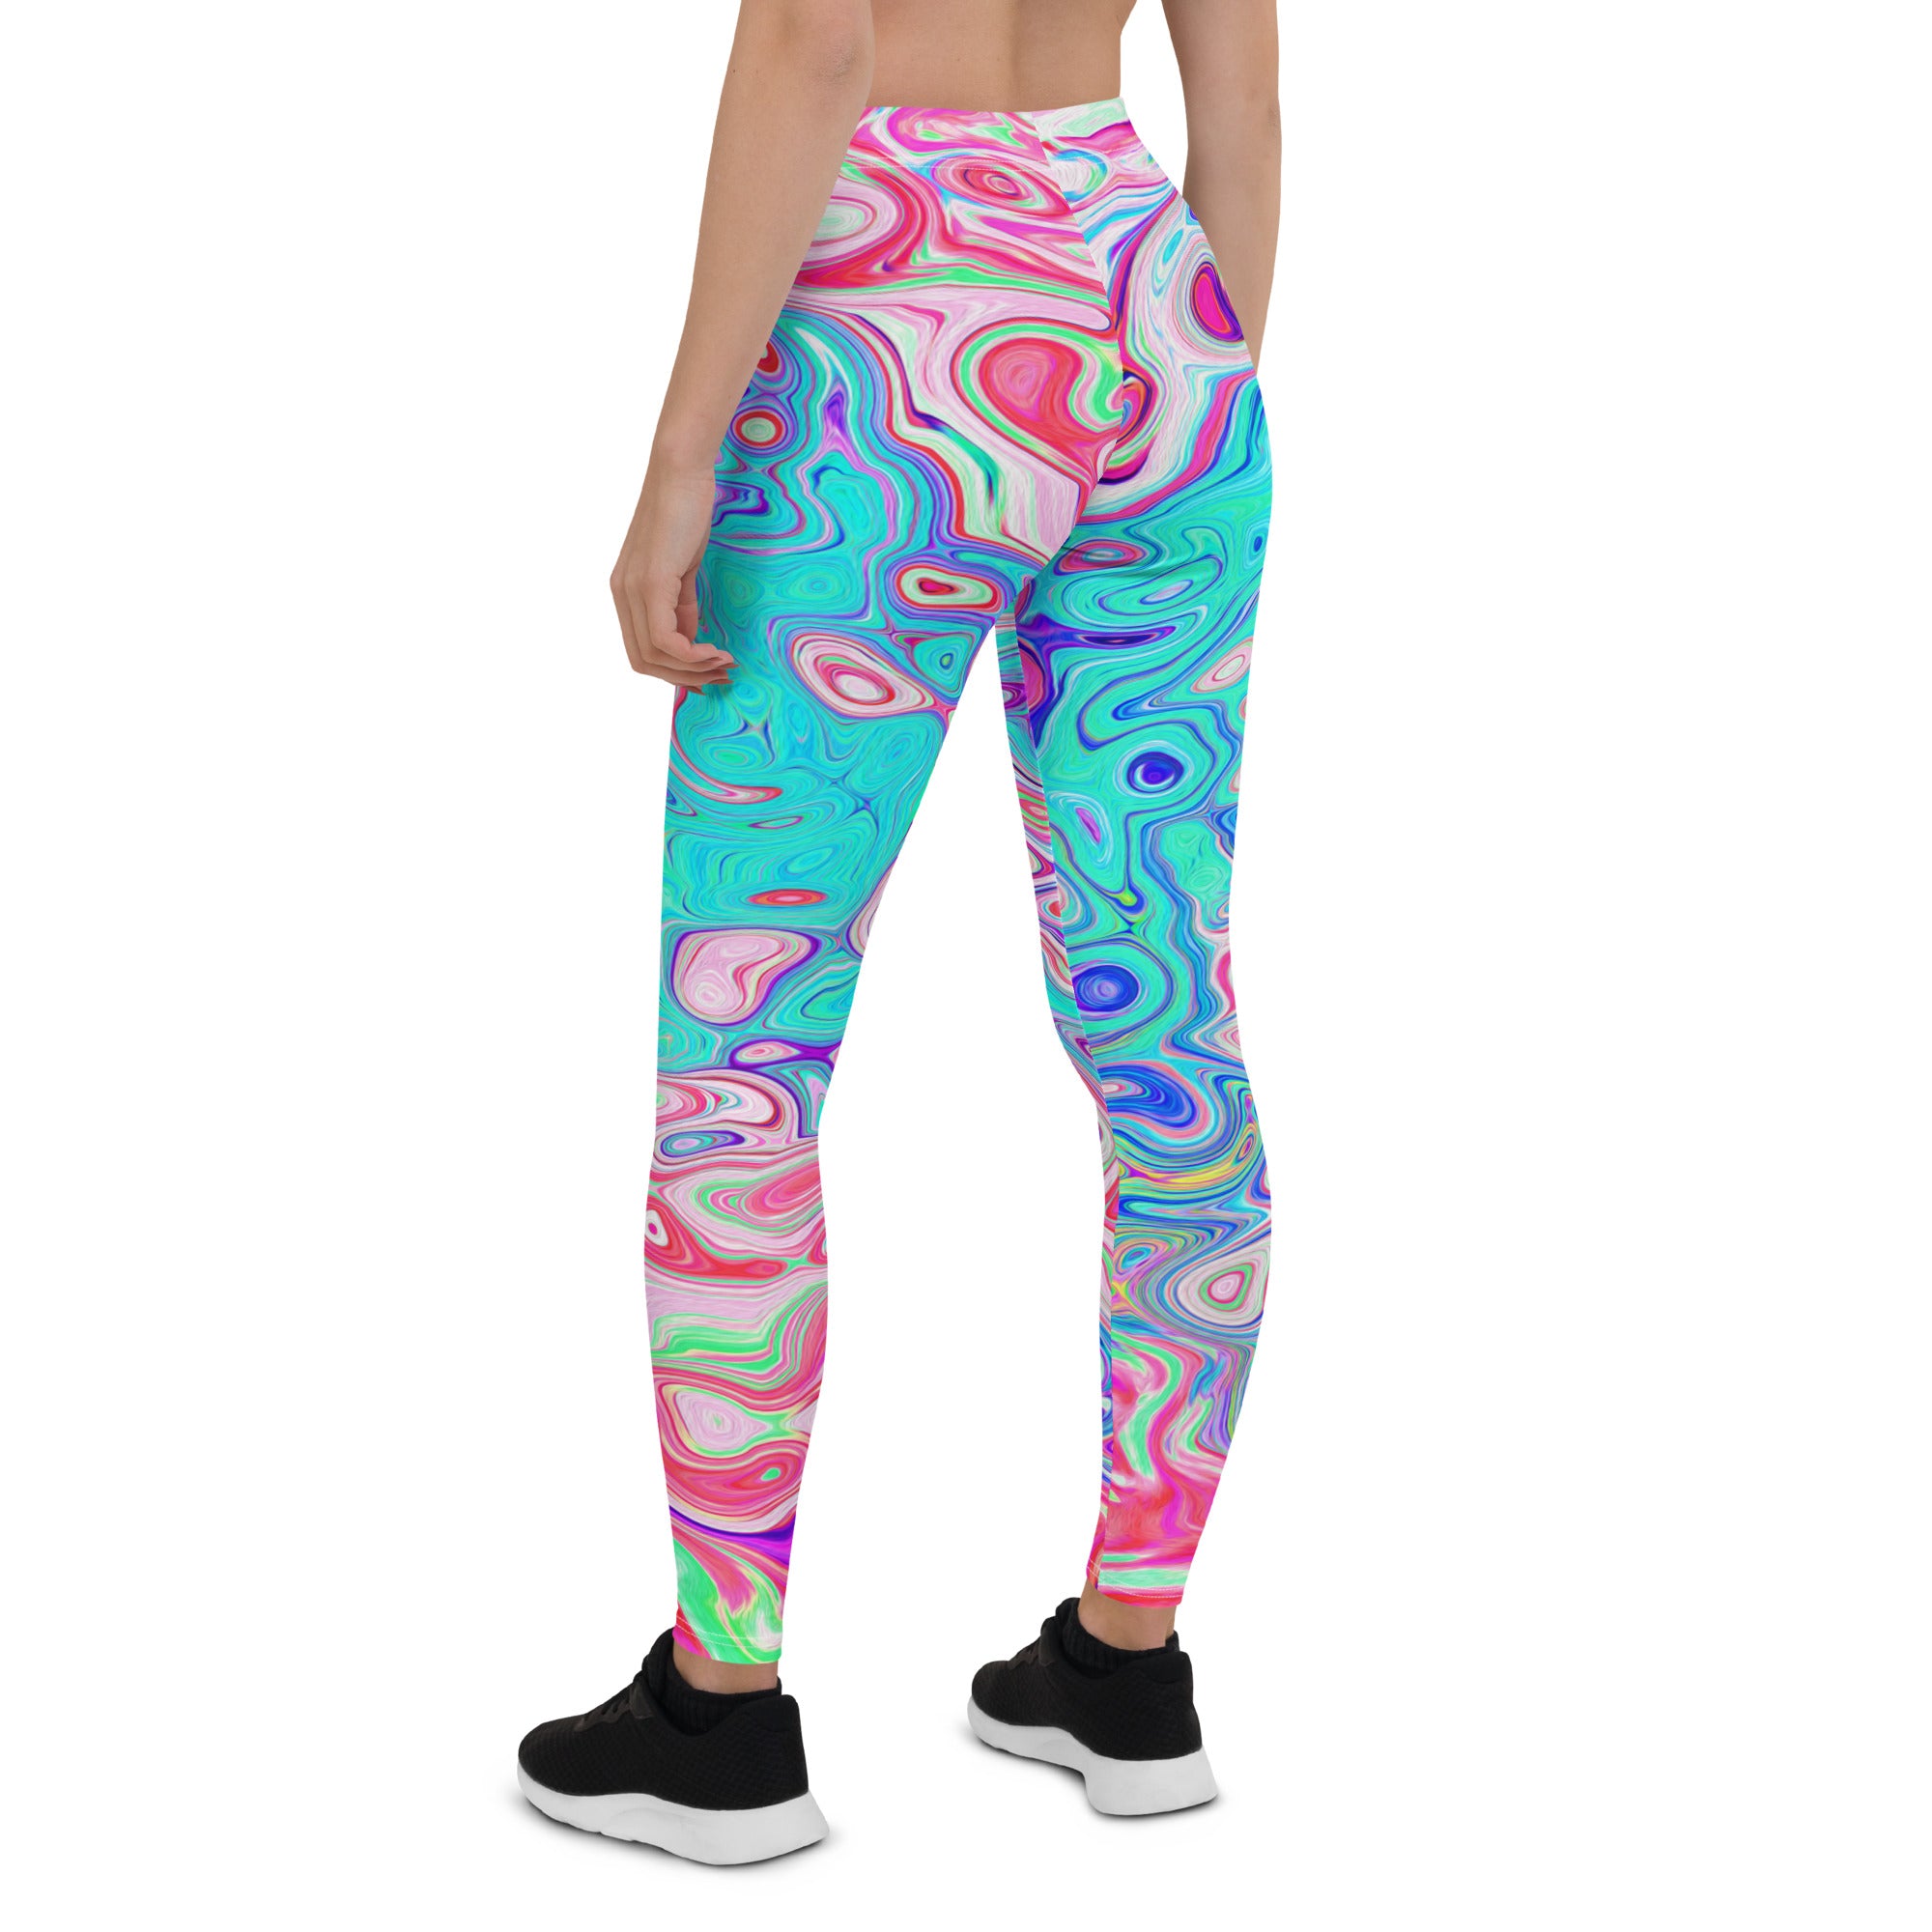 Leggings for Women - Groovy Aqua Blue and Pink Abstract Retro Swirl